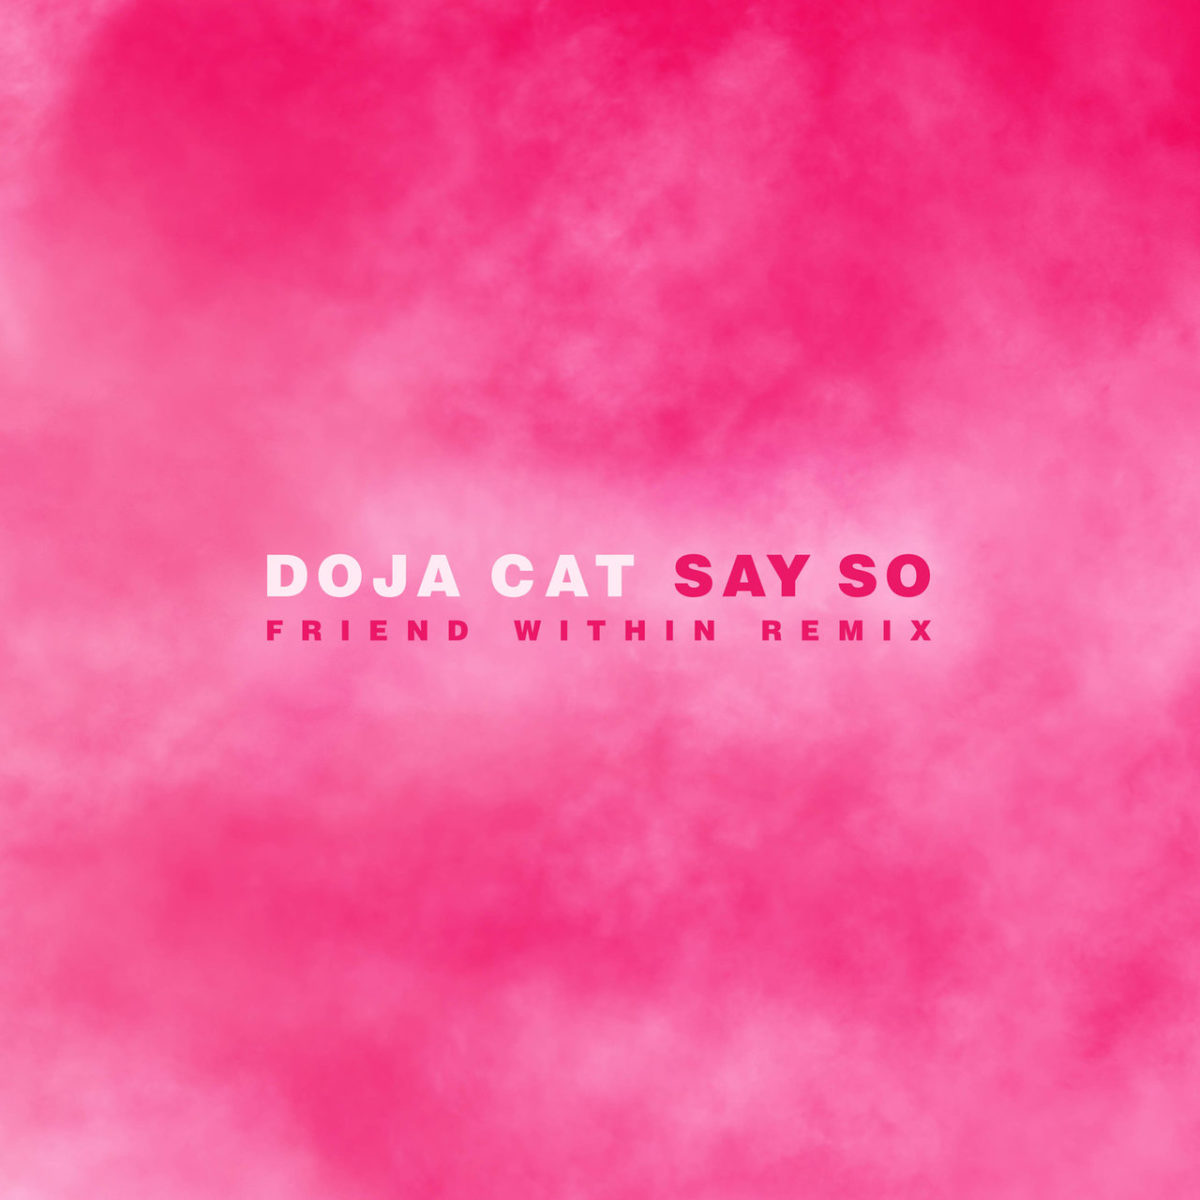 Doja Cat - Say So (Friend Within Remix) (Cover)